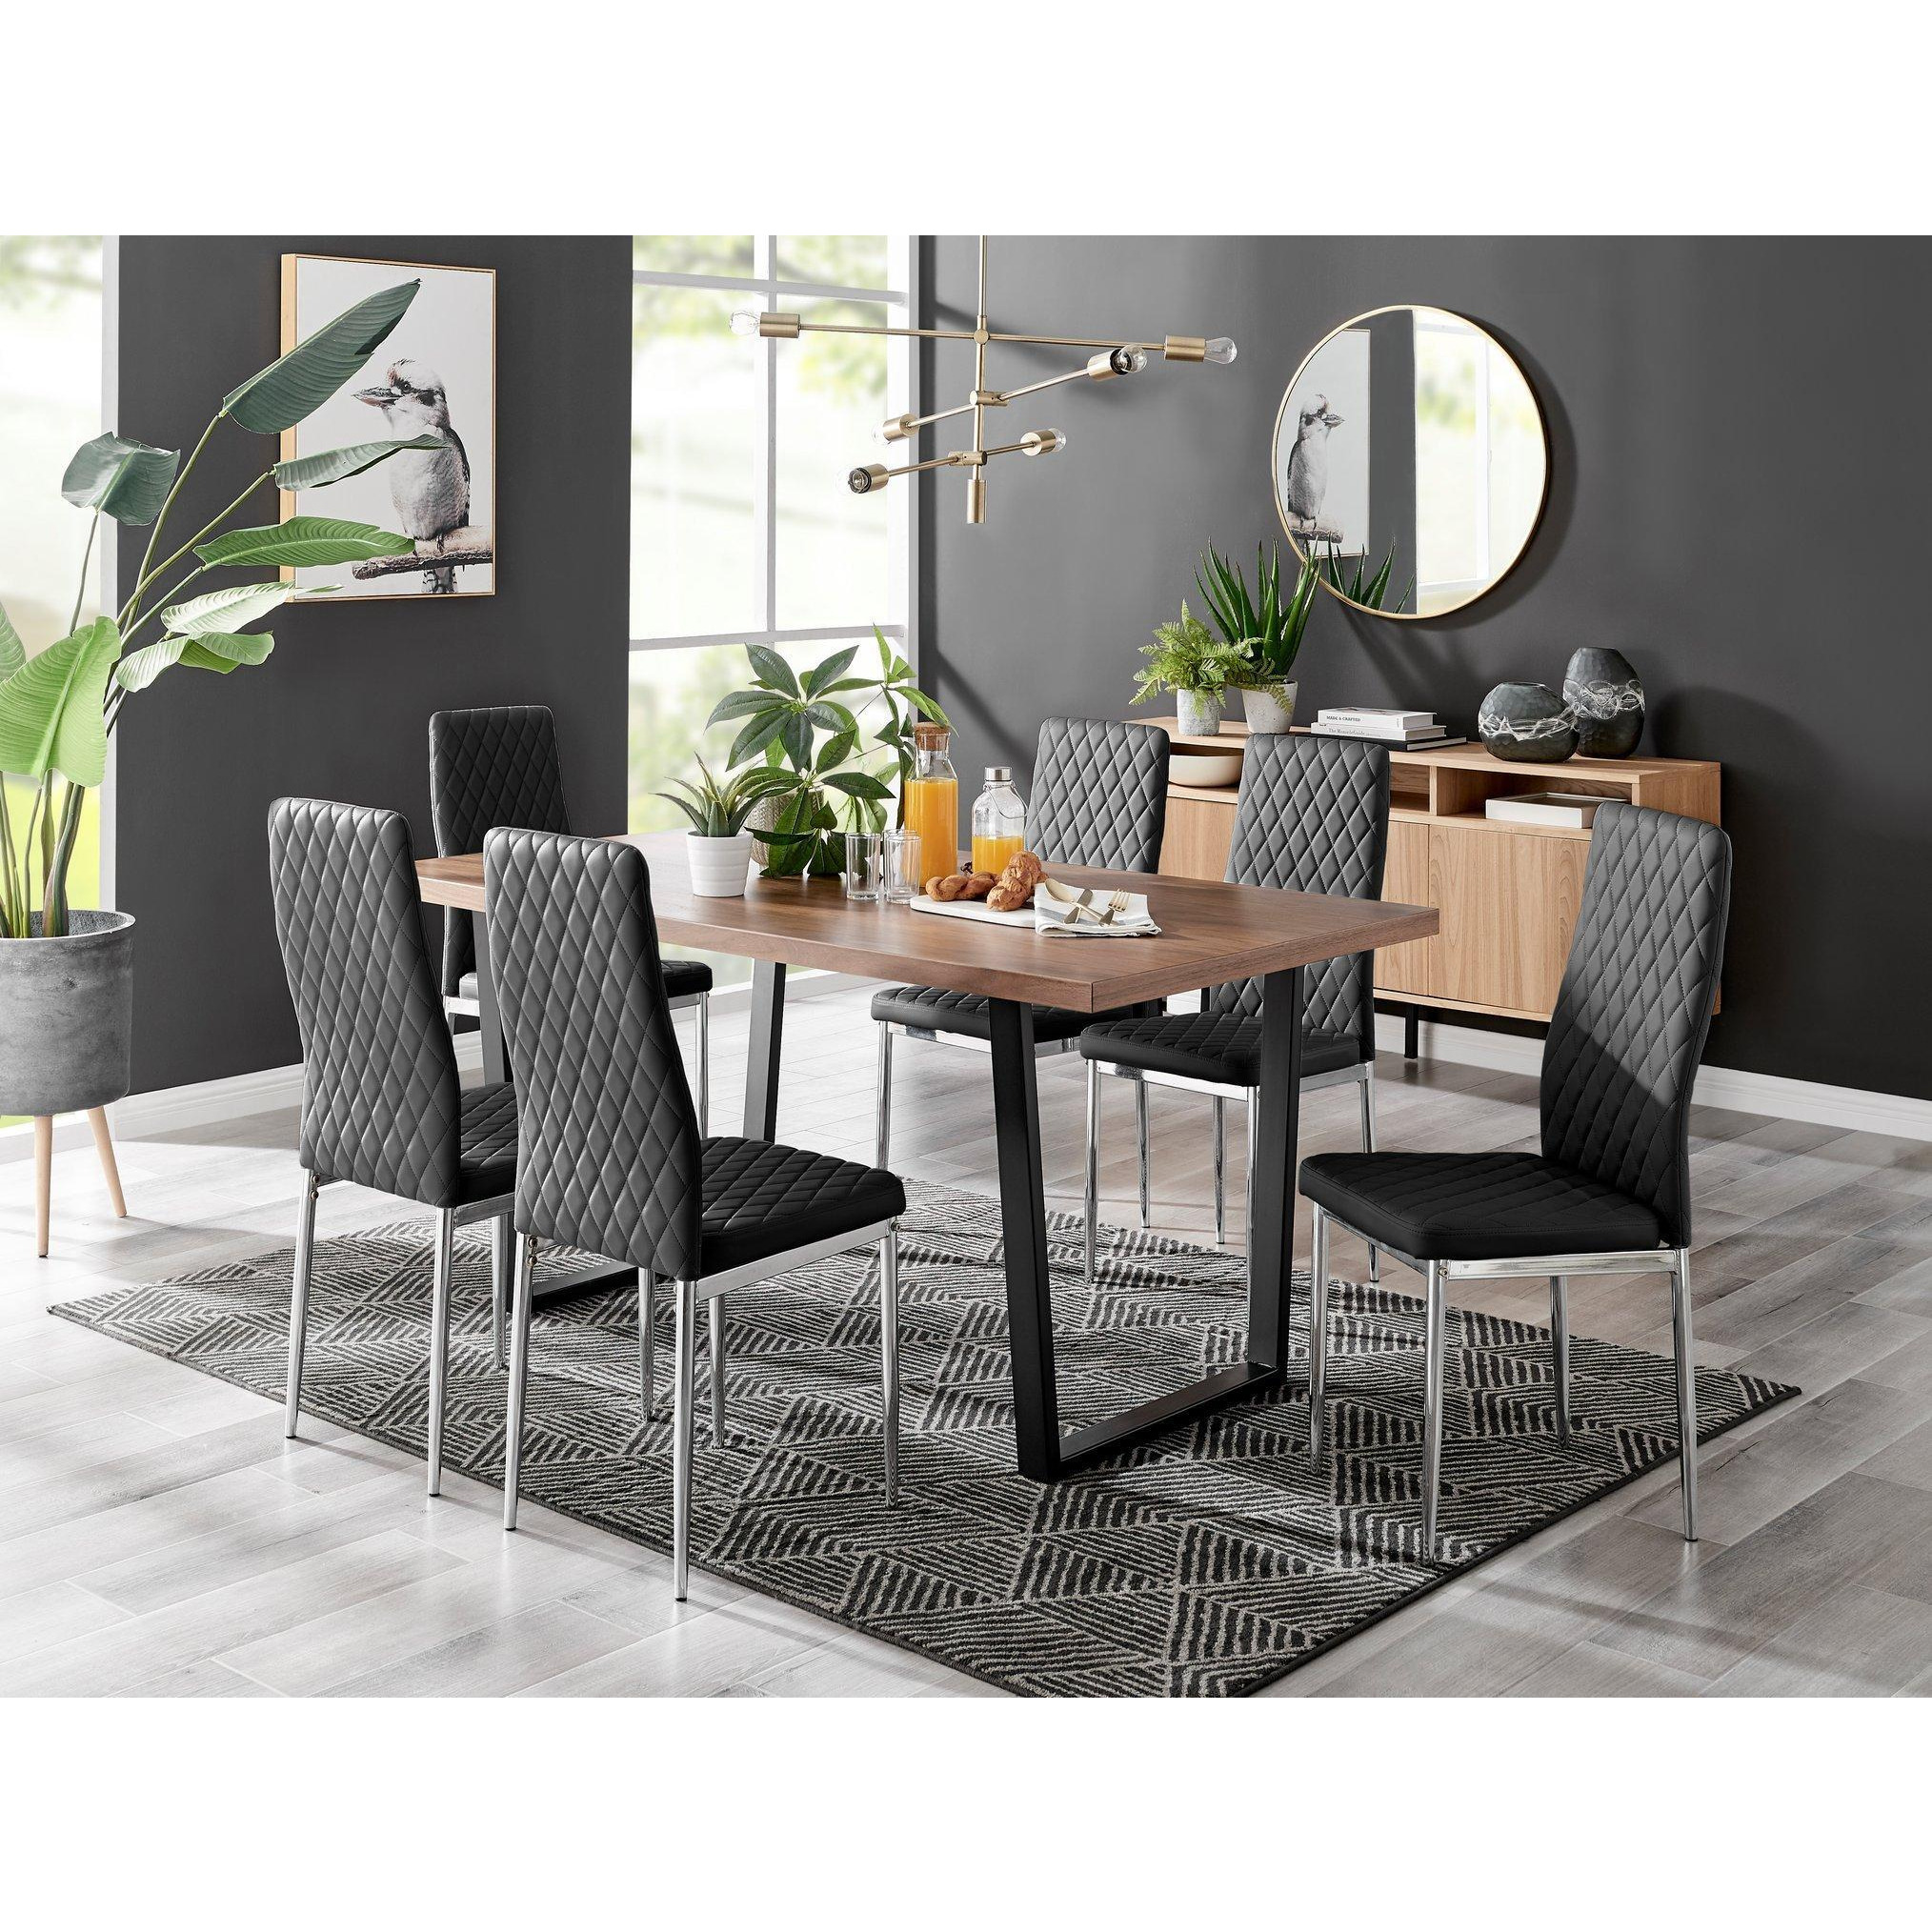 Kylo Large Brown Wood Effect Dining Table & 6 Milan Chrome Leg Faux LeatherChairs - image 1